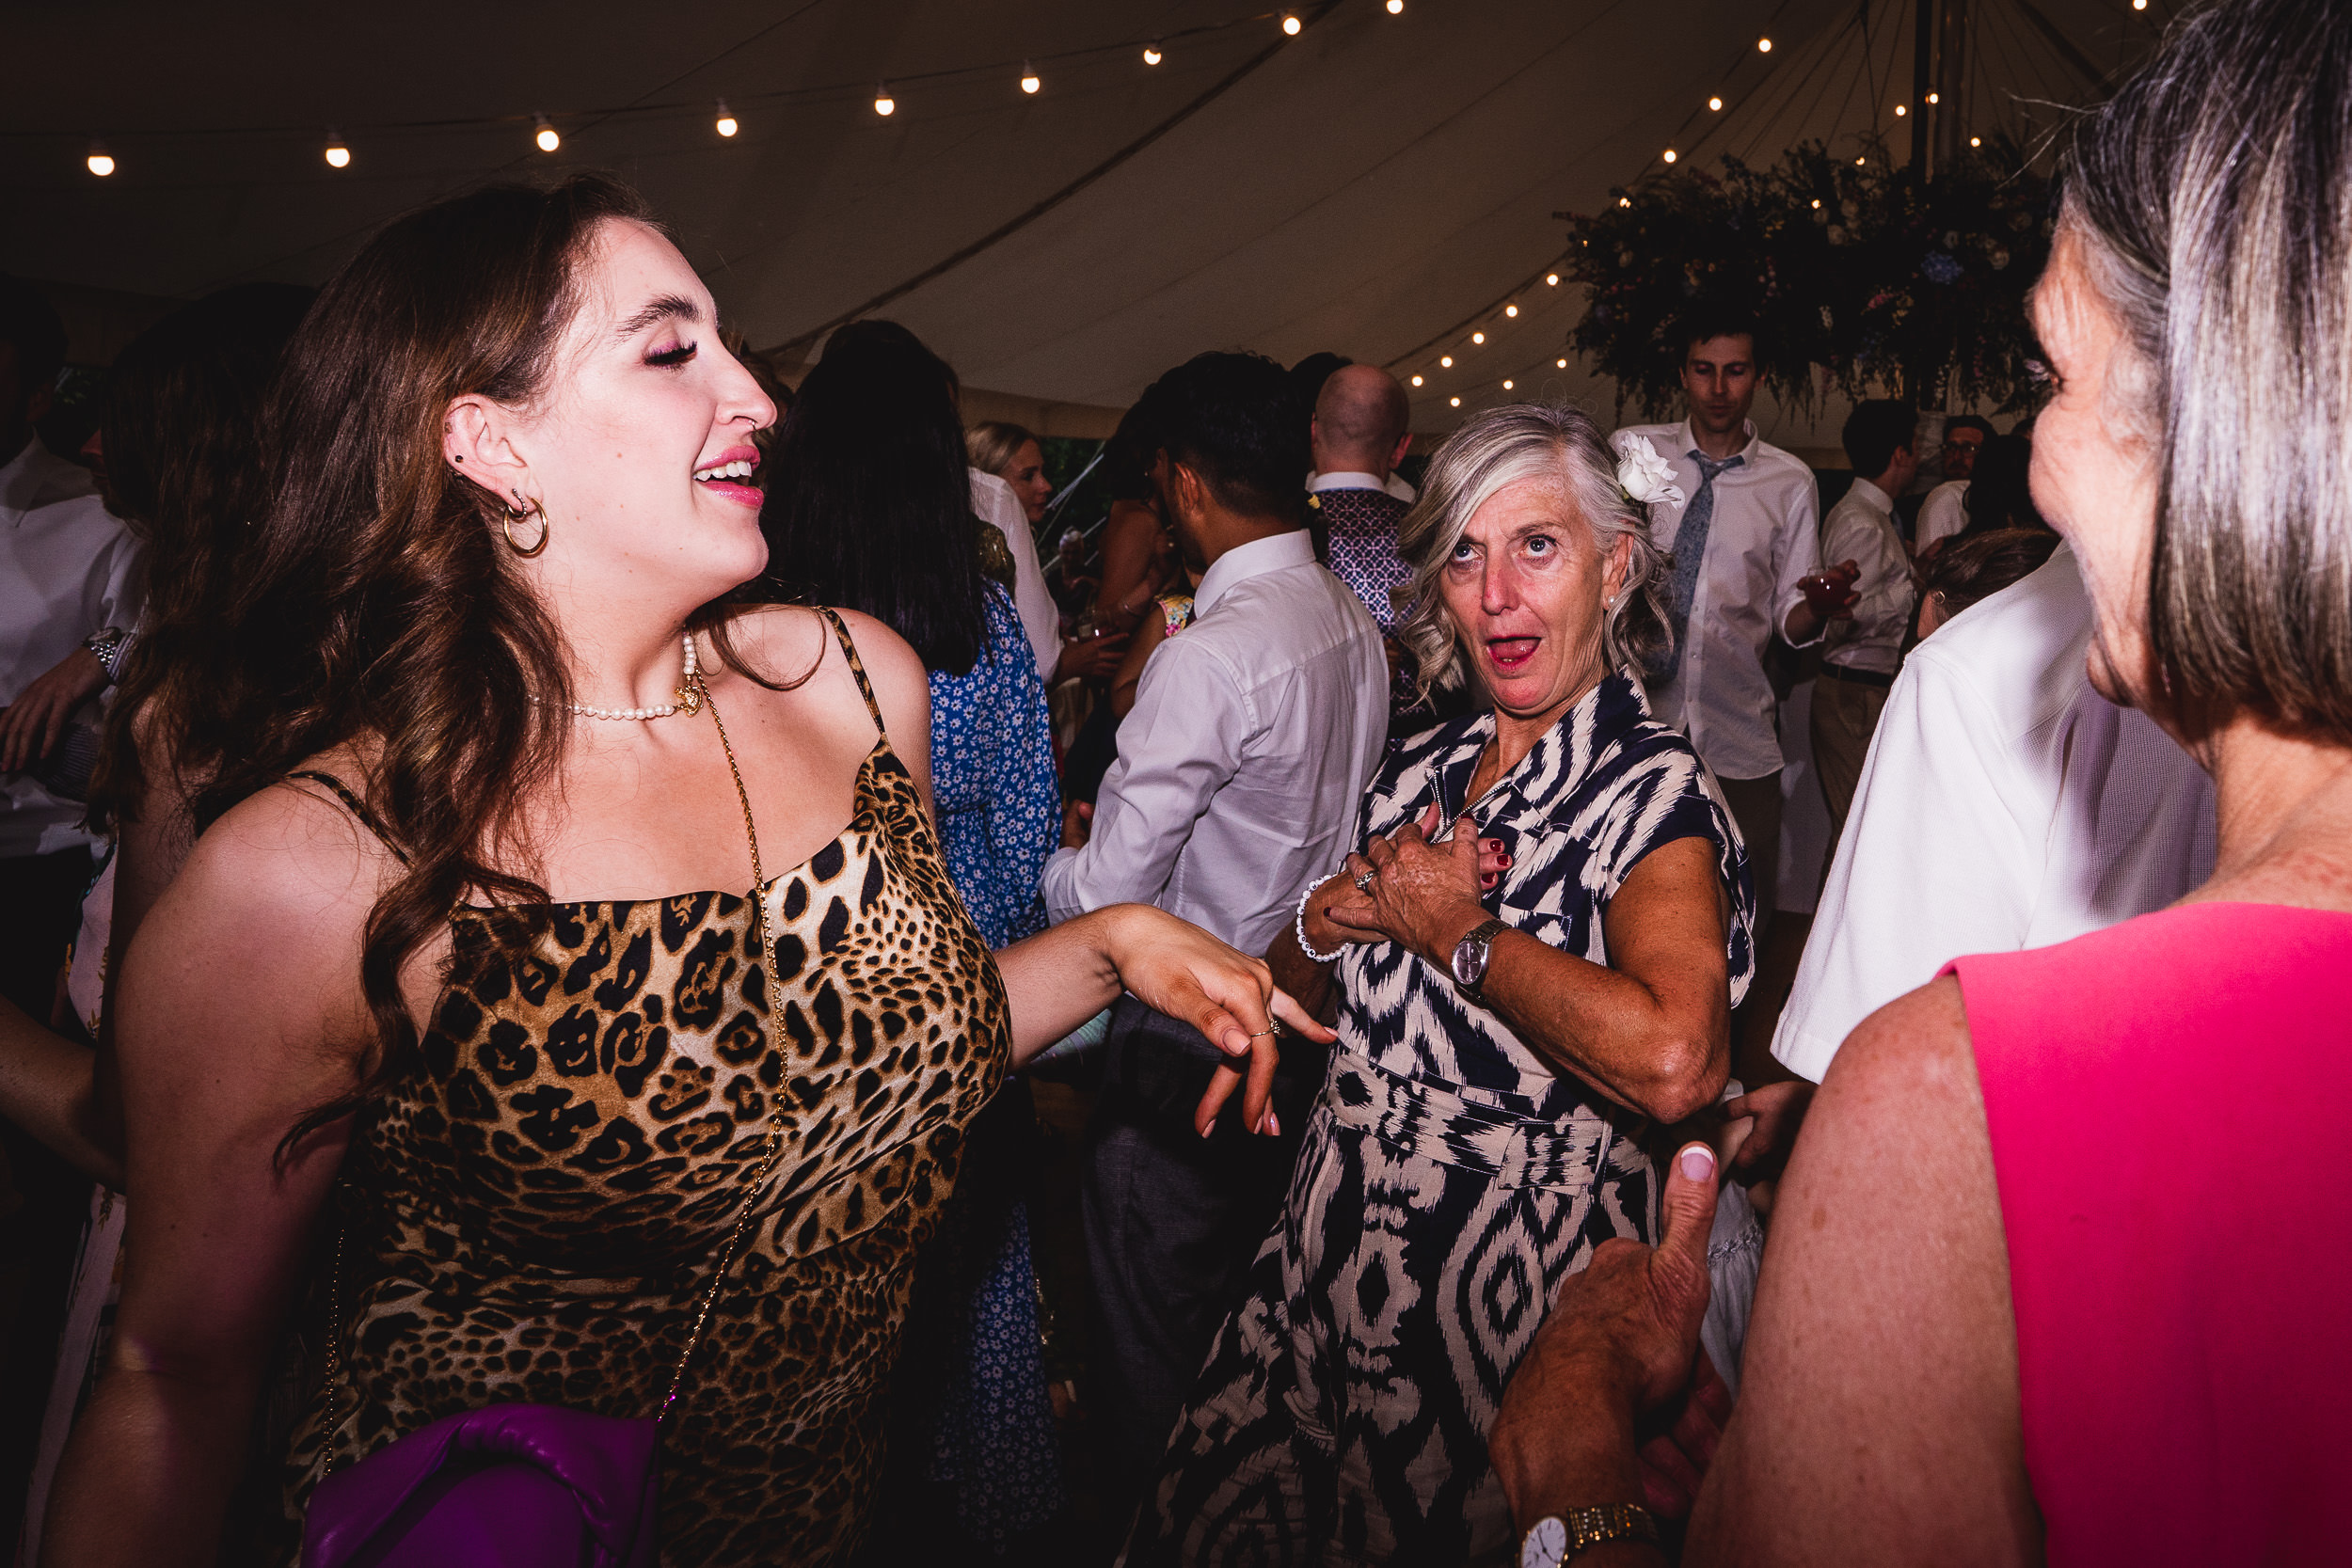 A group of people, including the bride and groom, dancing in a tent at a wedding while being photographed by the wedding photographer.